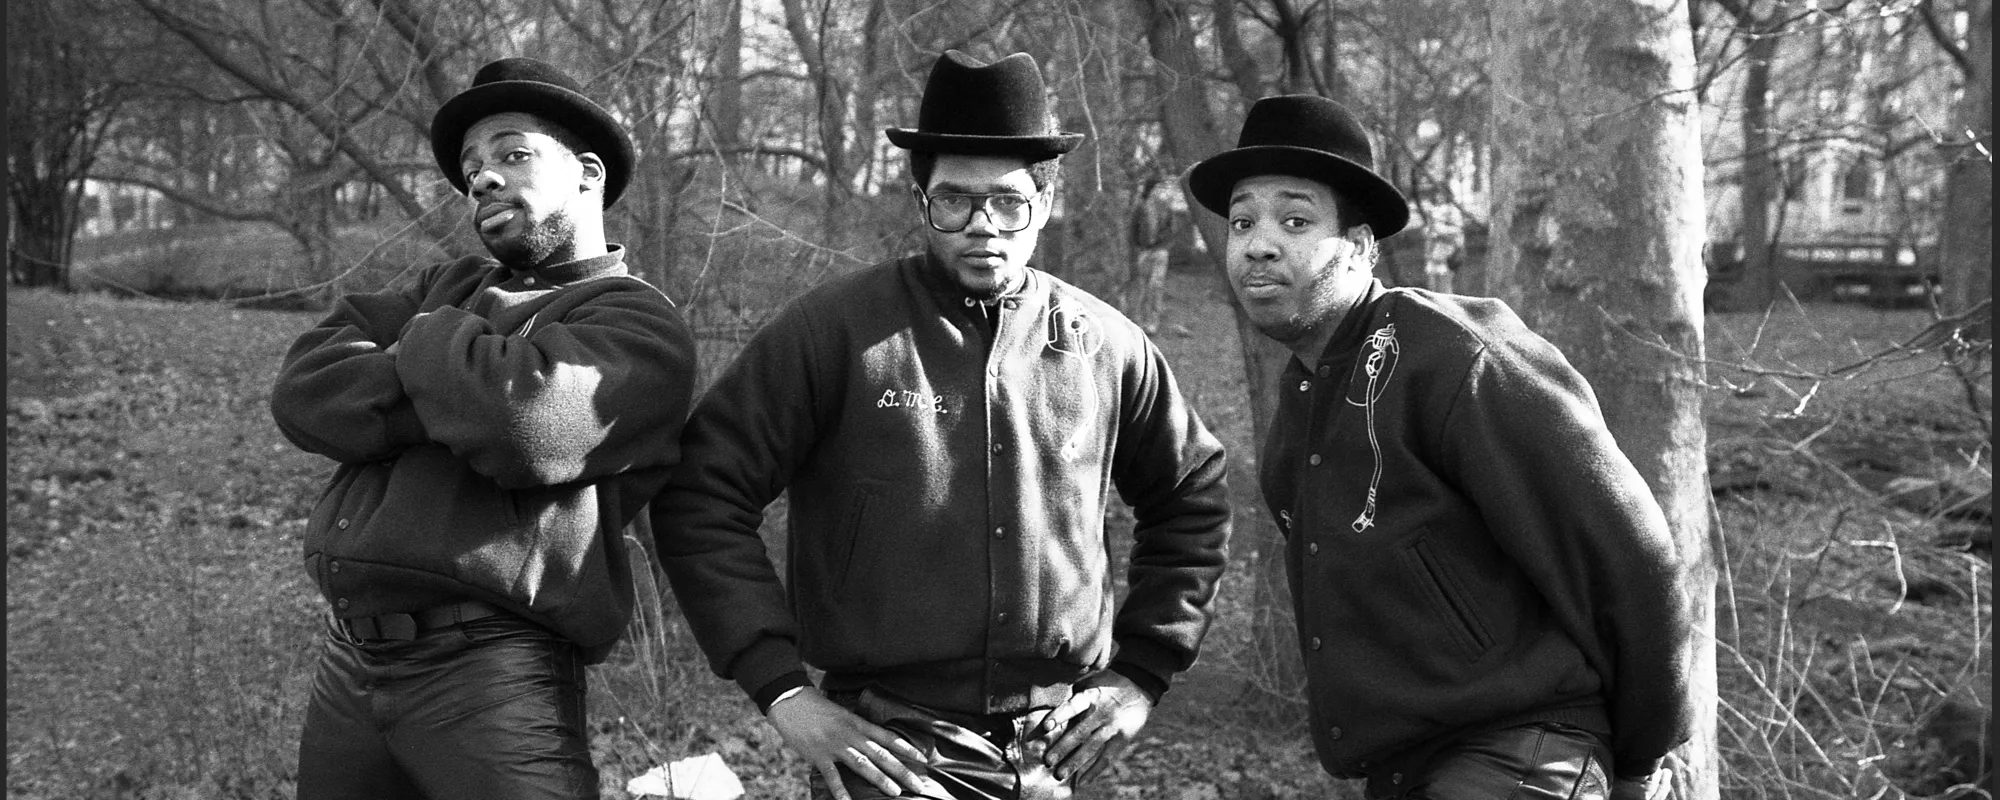 Behind the Meaning and the History of the Band Name: Run-DMC